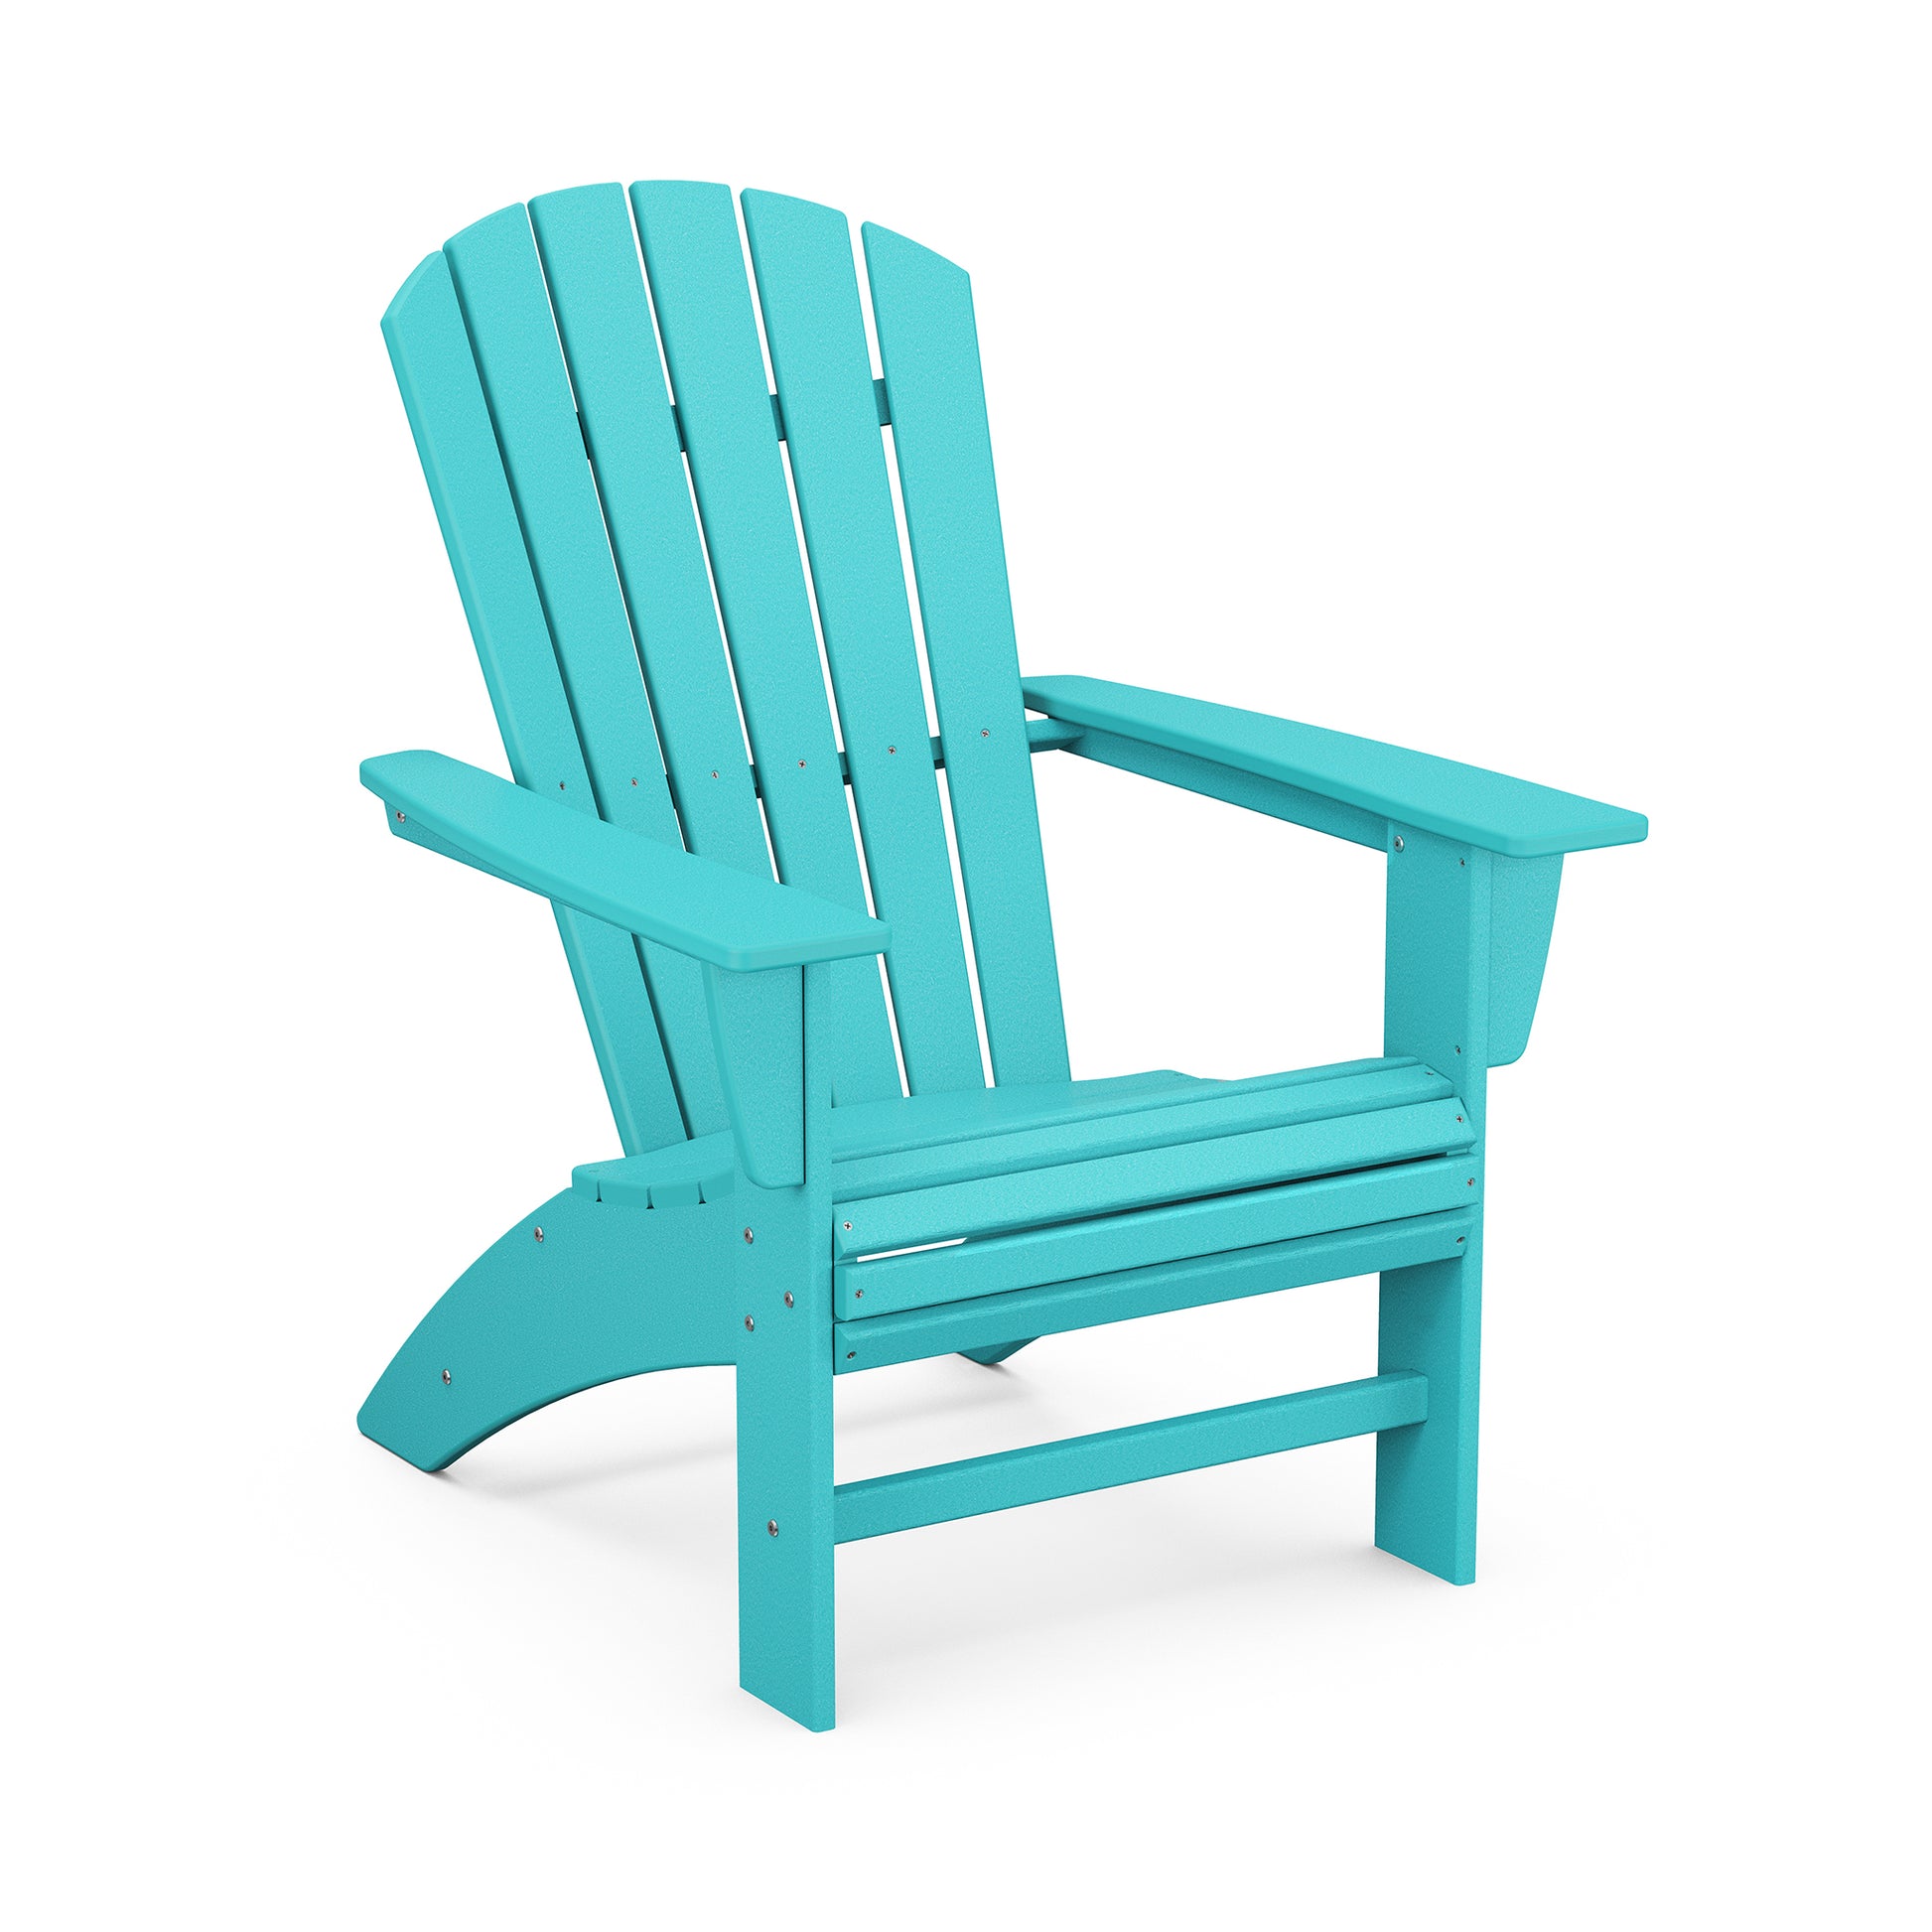 A vibrant turquoise POLYWOOD Nautical Curveback Adirondack Chair isolated on a white background, featuring a slatted design and wide armrests.